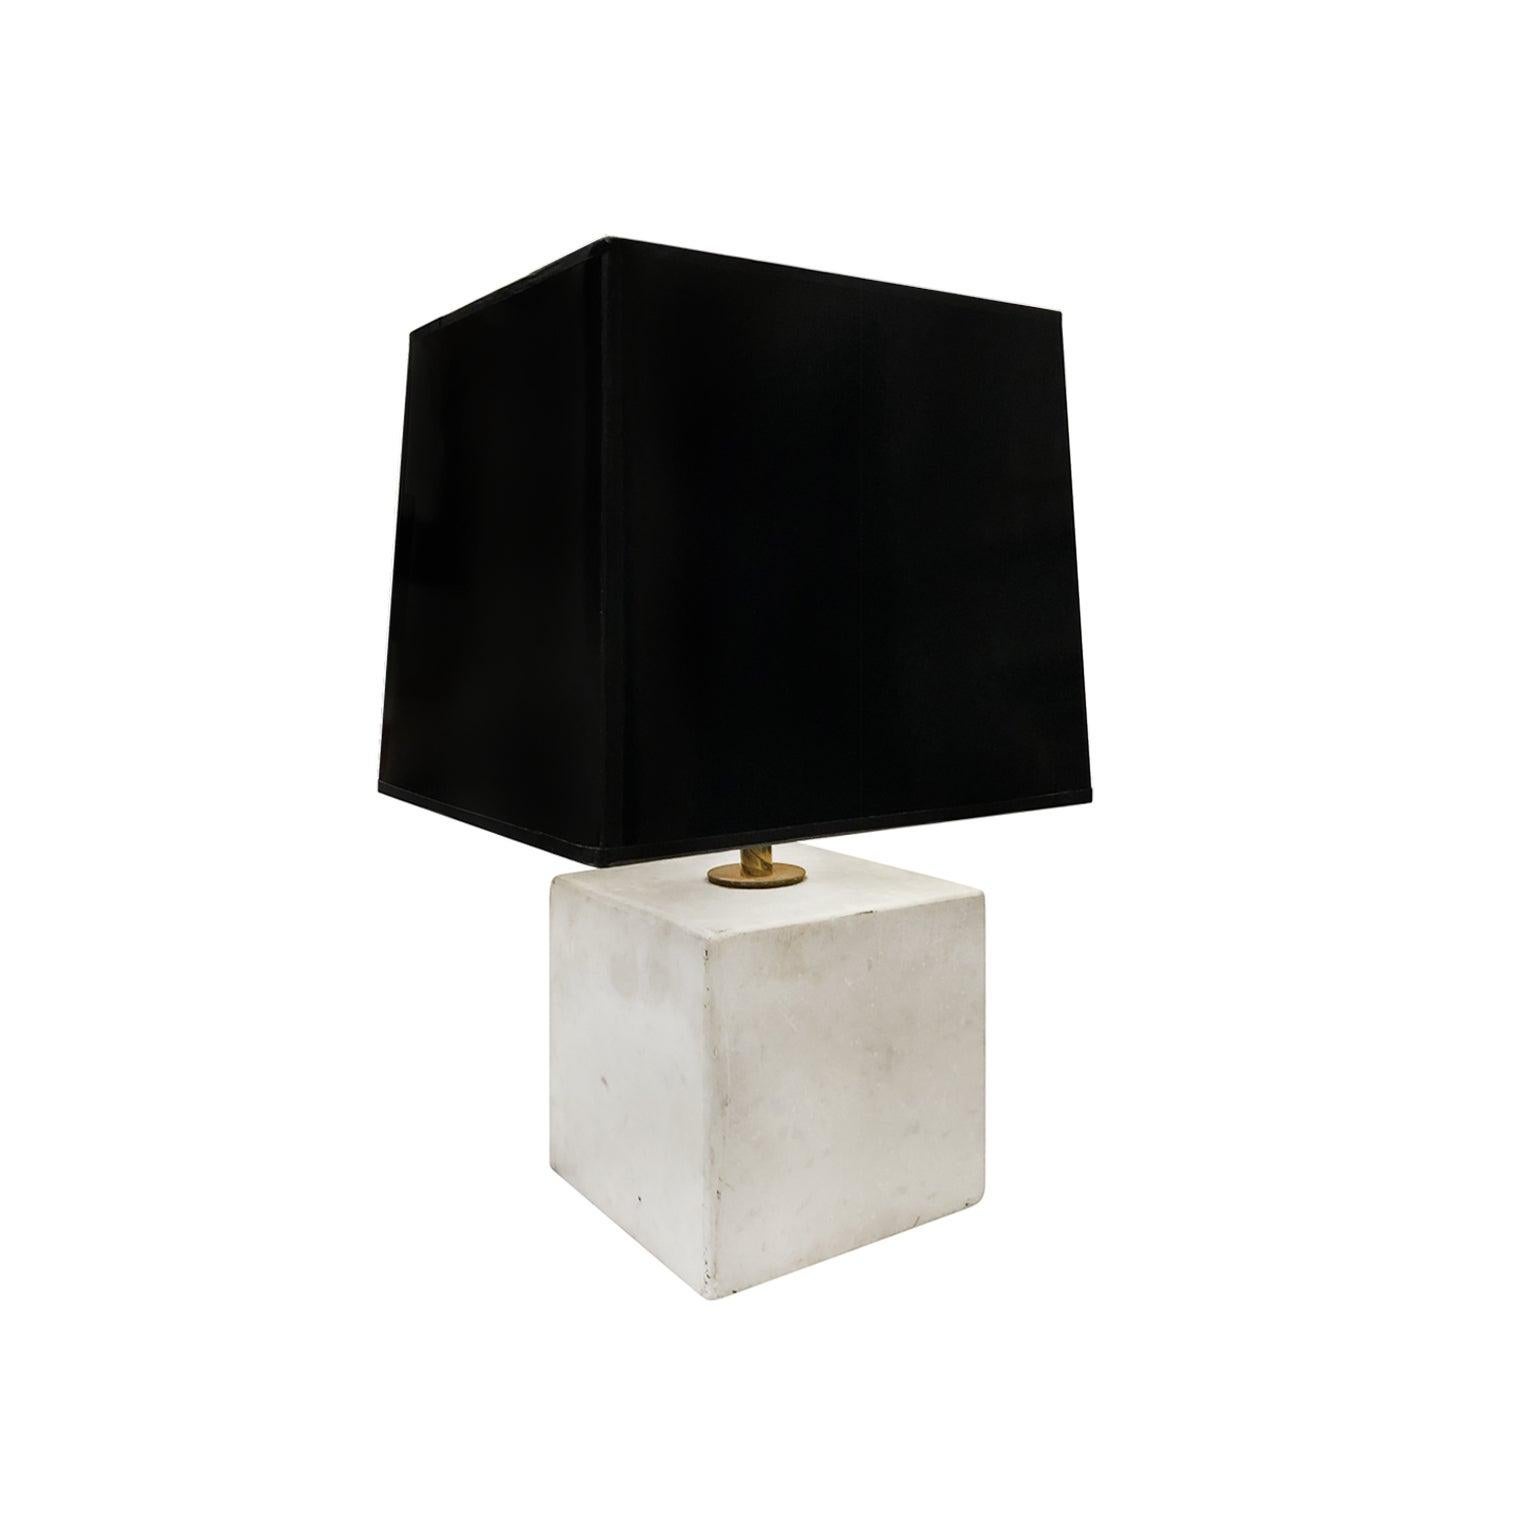 Marble cube lamp, USA, 1970s.
 